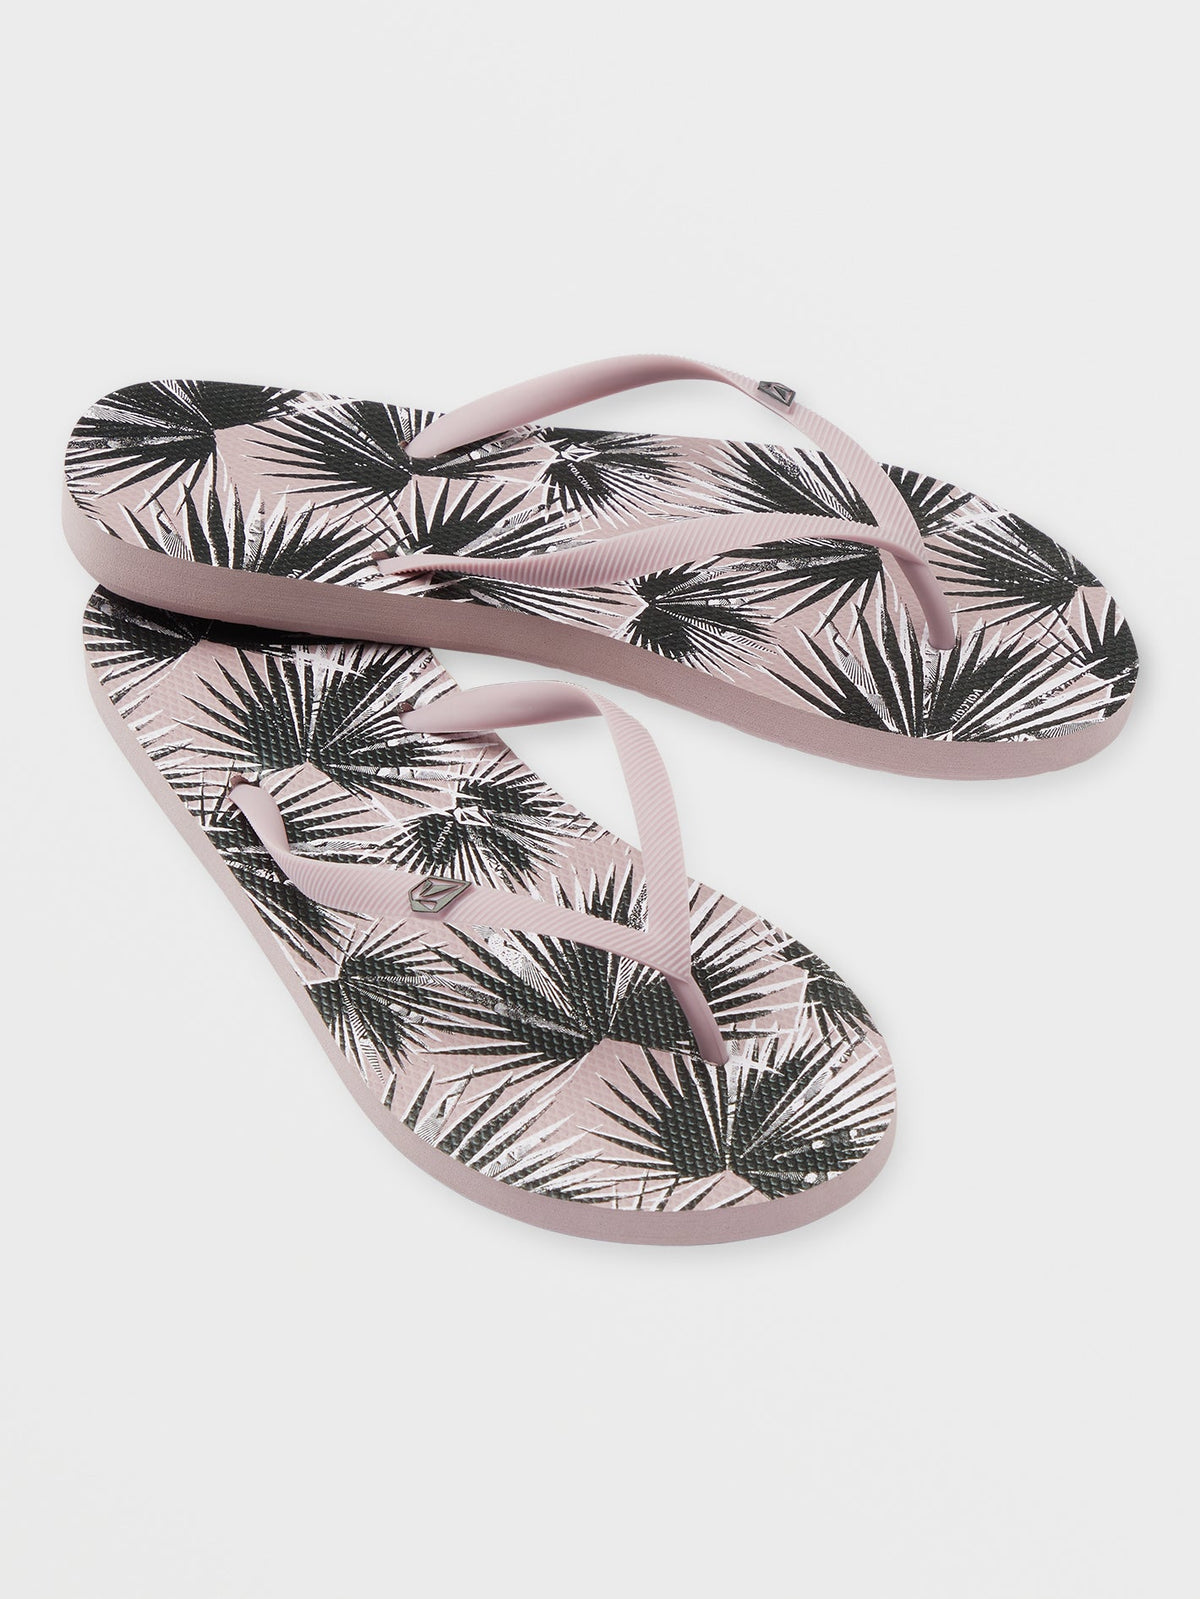 Volcom Rocking Solid Women's Sandals Faded Mauve